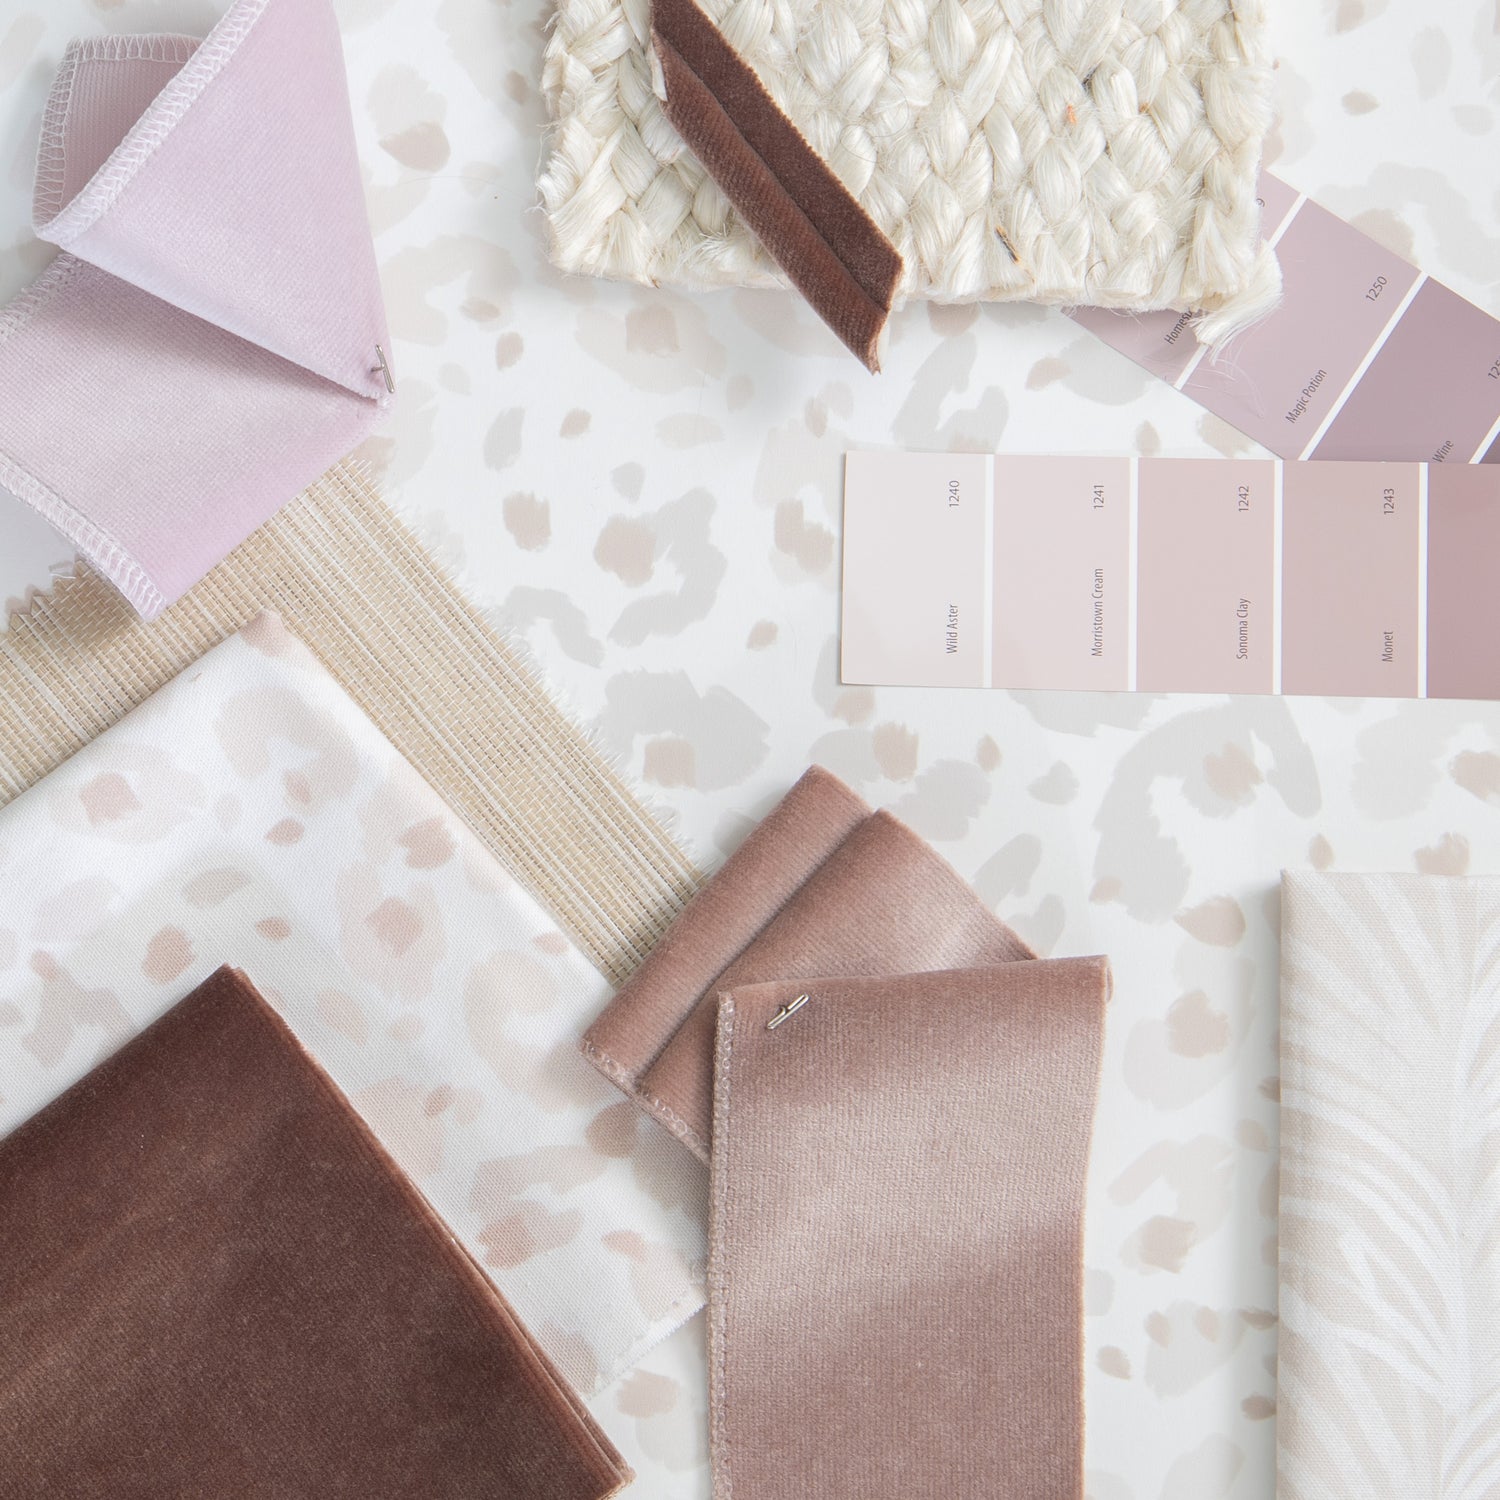 Interior design moodboard and fabric inspirations with mauve velvet swatch, pink velvet swatch, beige animal print swatch, and beige botanical stripe printed swatch